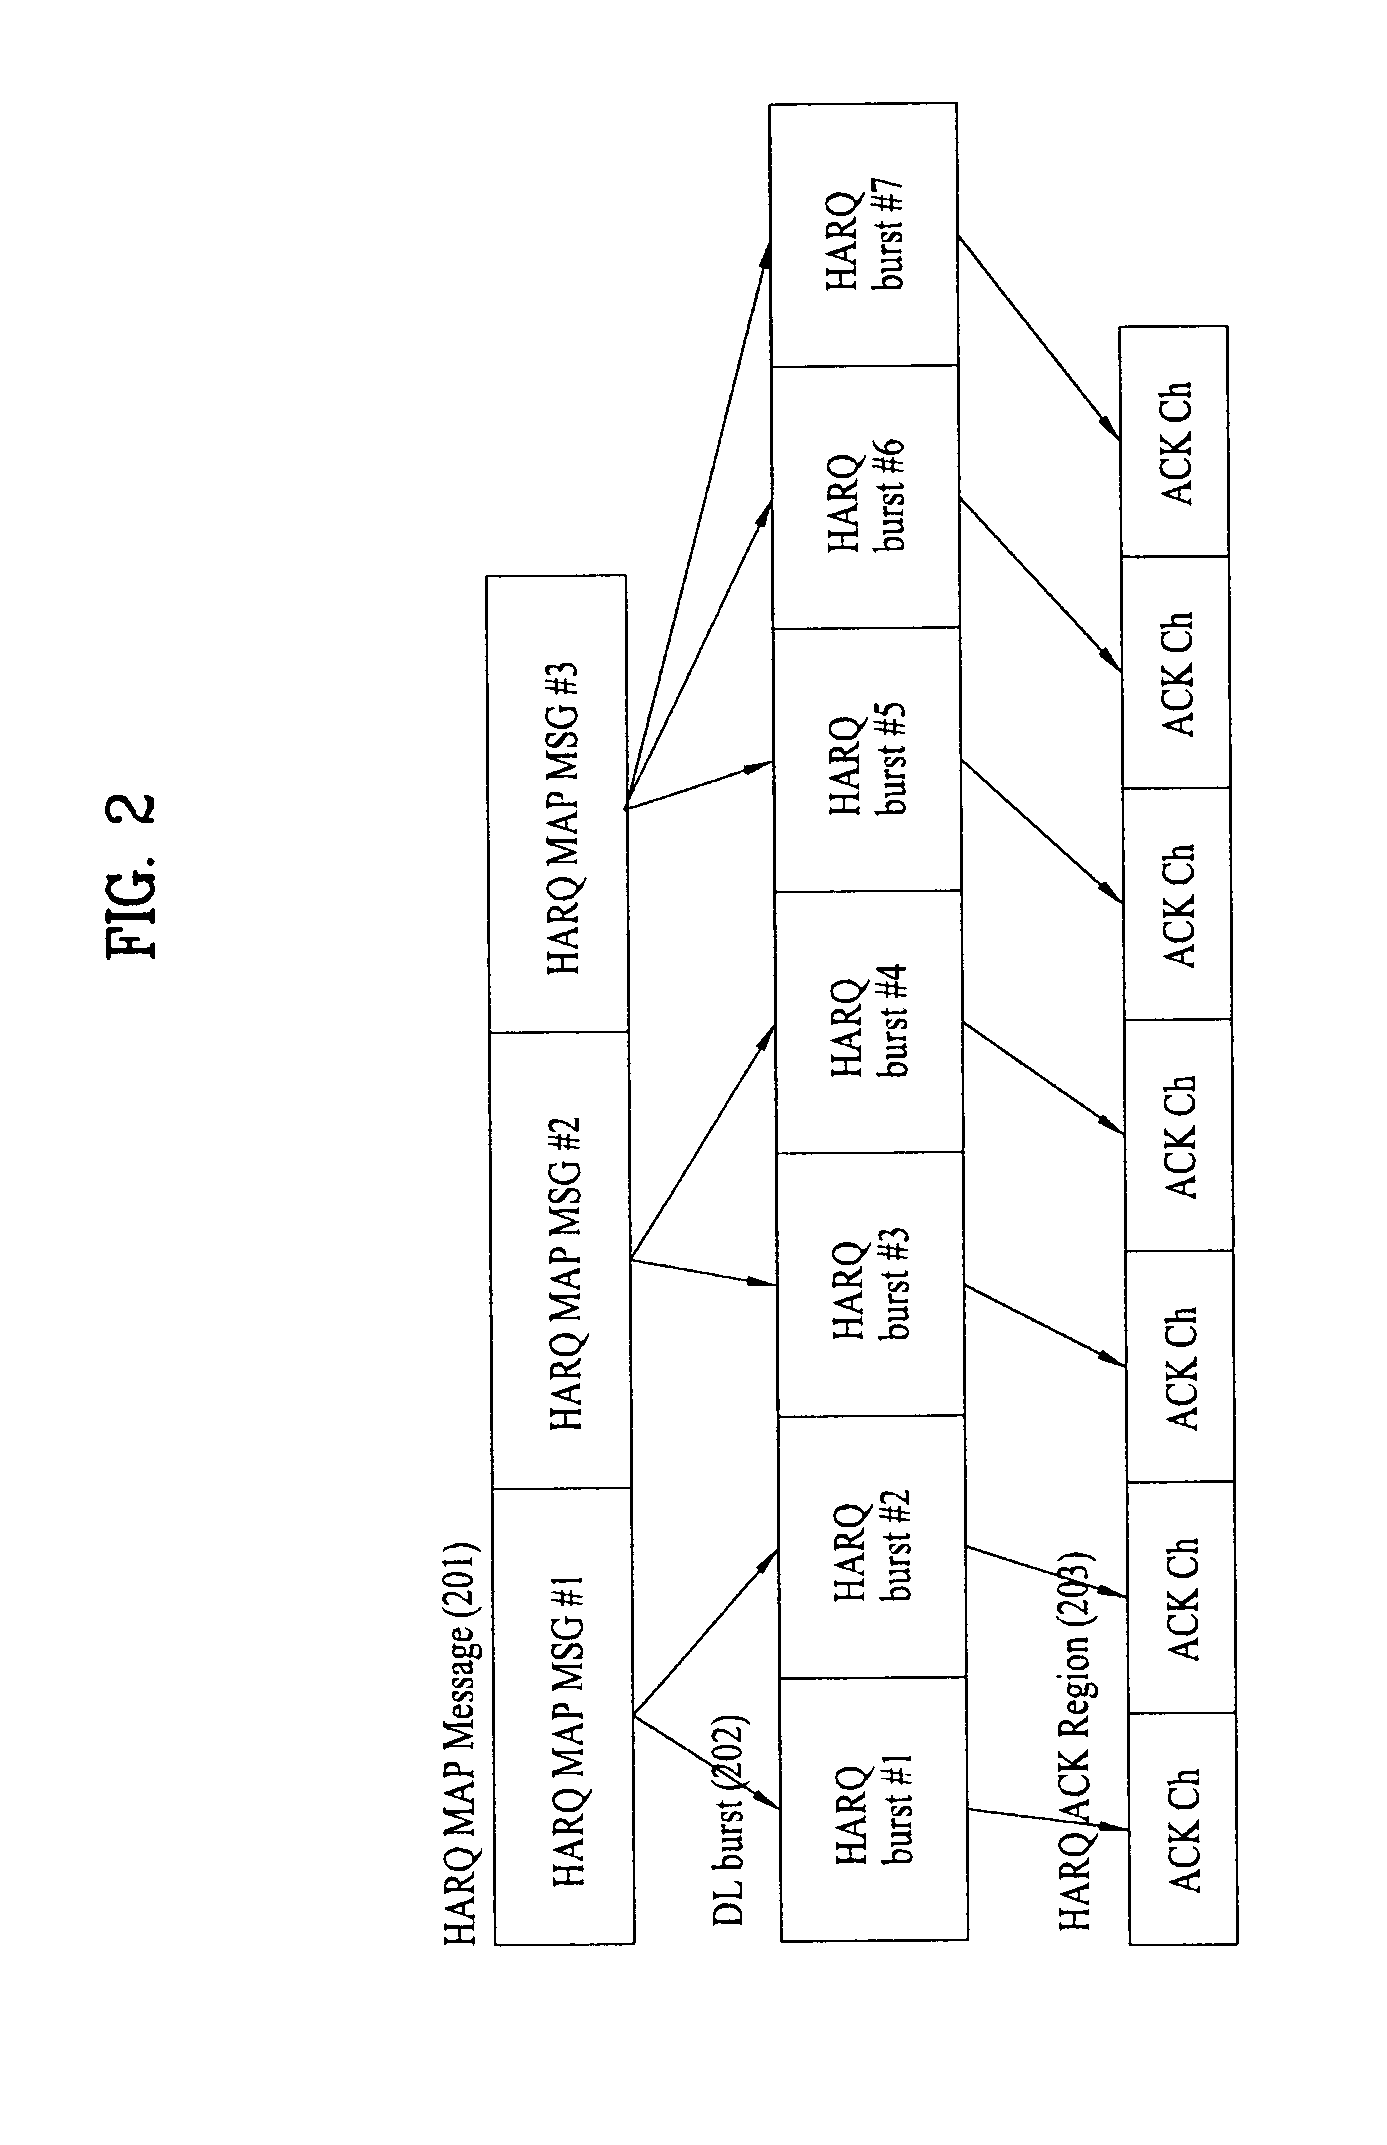 Method of emergency service request using control channel